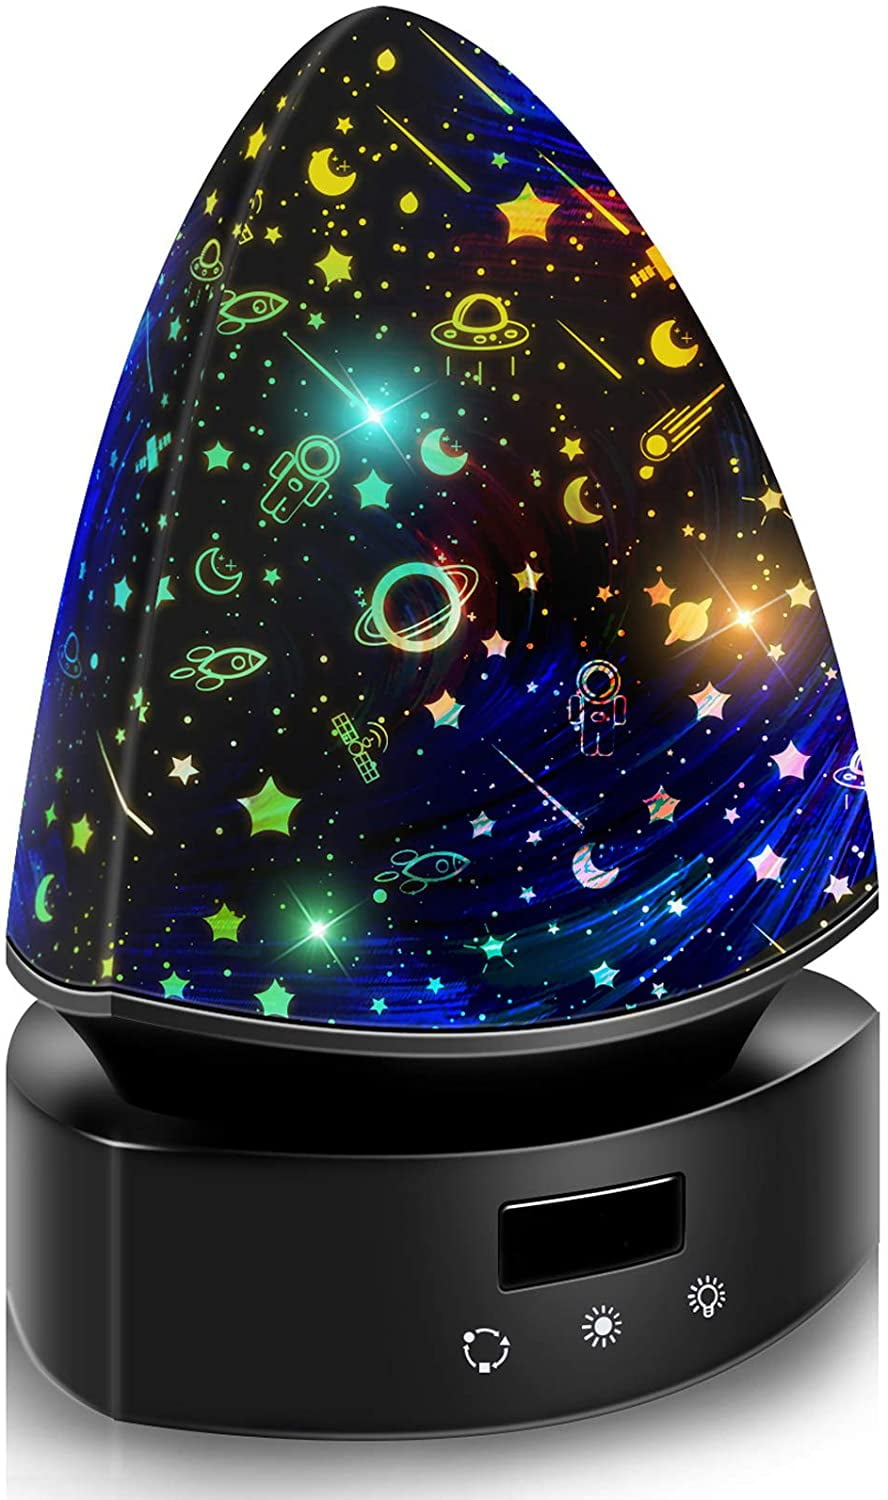 Verlaten Wantrouwen Margaret Mitchell Night Light for Kids, Night Light Projector 360 Degree Rotation Star Light  Projector with USB Cable for Bedroom- Black - Walmart.com